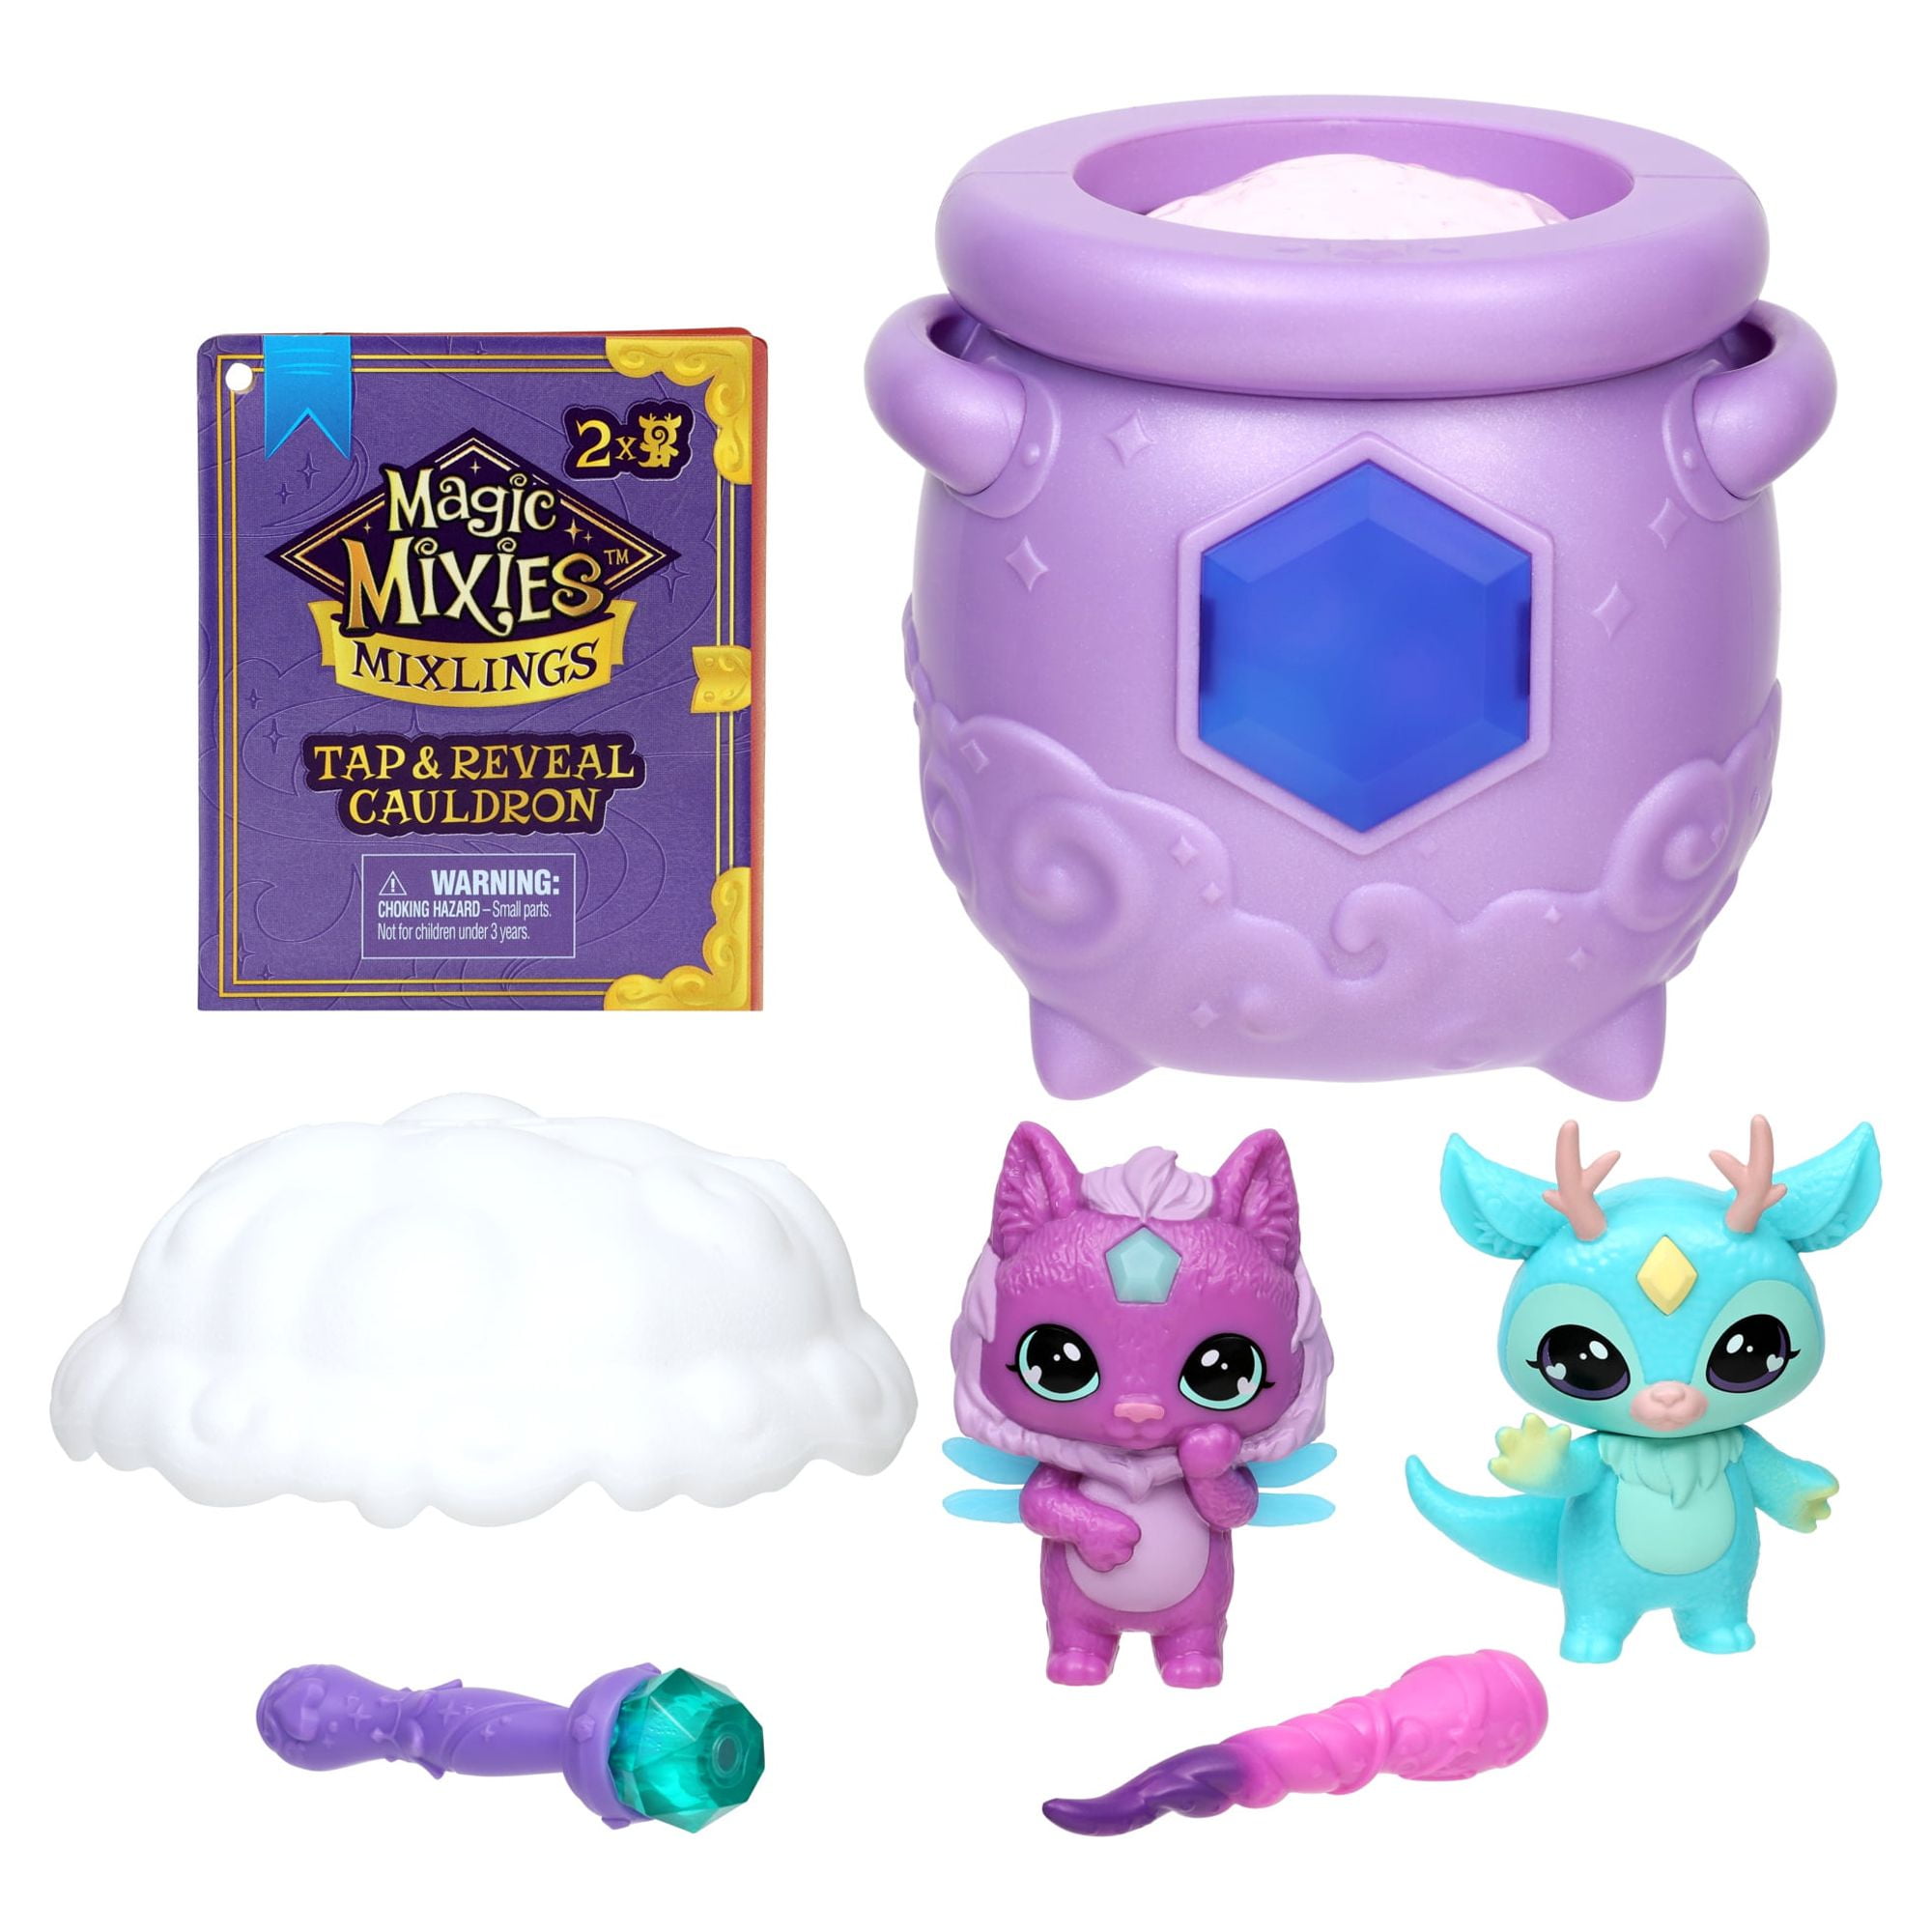 Magic Mixies Mixlings Tap & Reveal Cauldron 2 Pack, Magic Wand Reveals Magic  Power and Surprise Reveal on Cauldron, Colors and Styles May Vary, Toys for  Kids Aged 5 and Up 